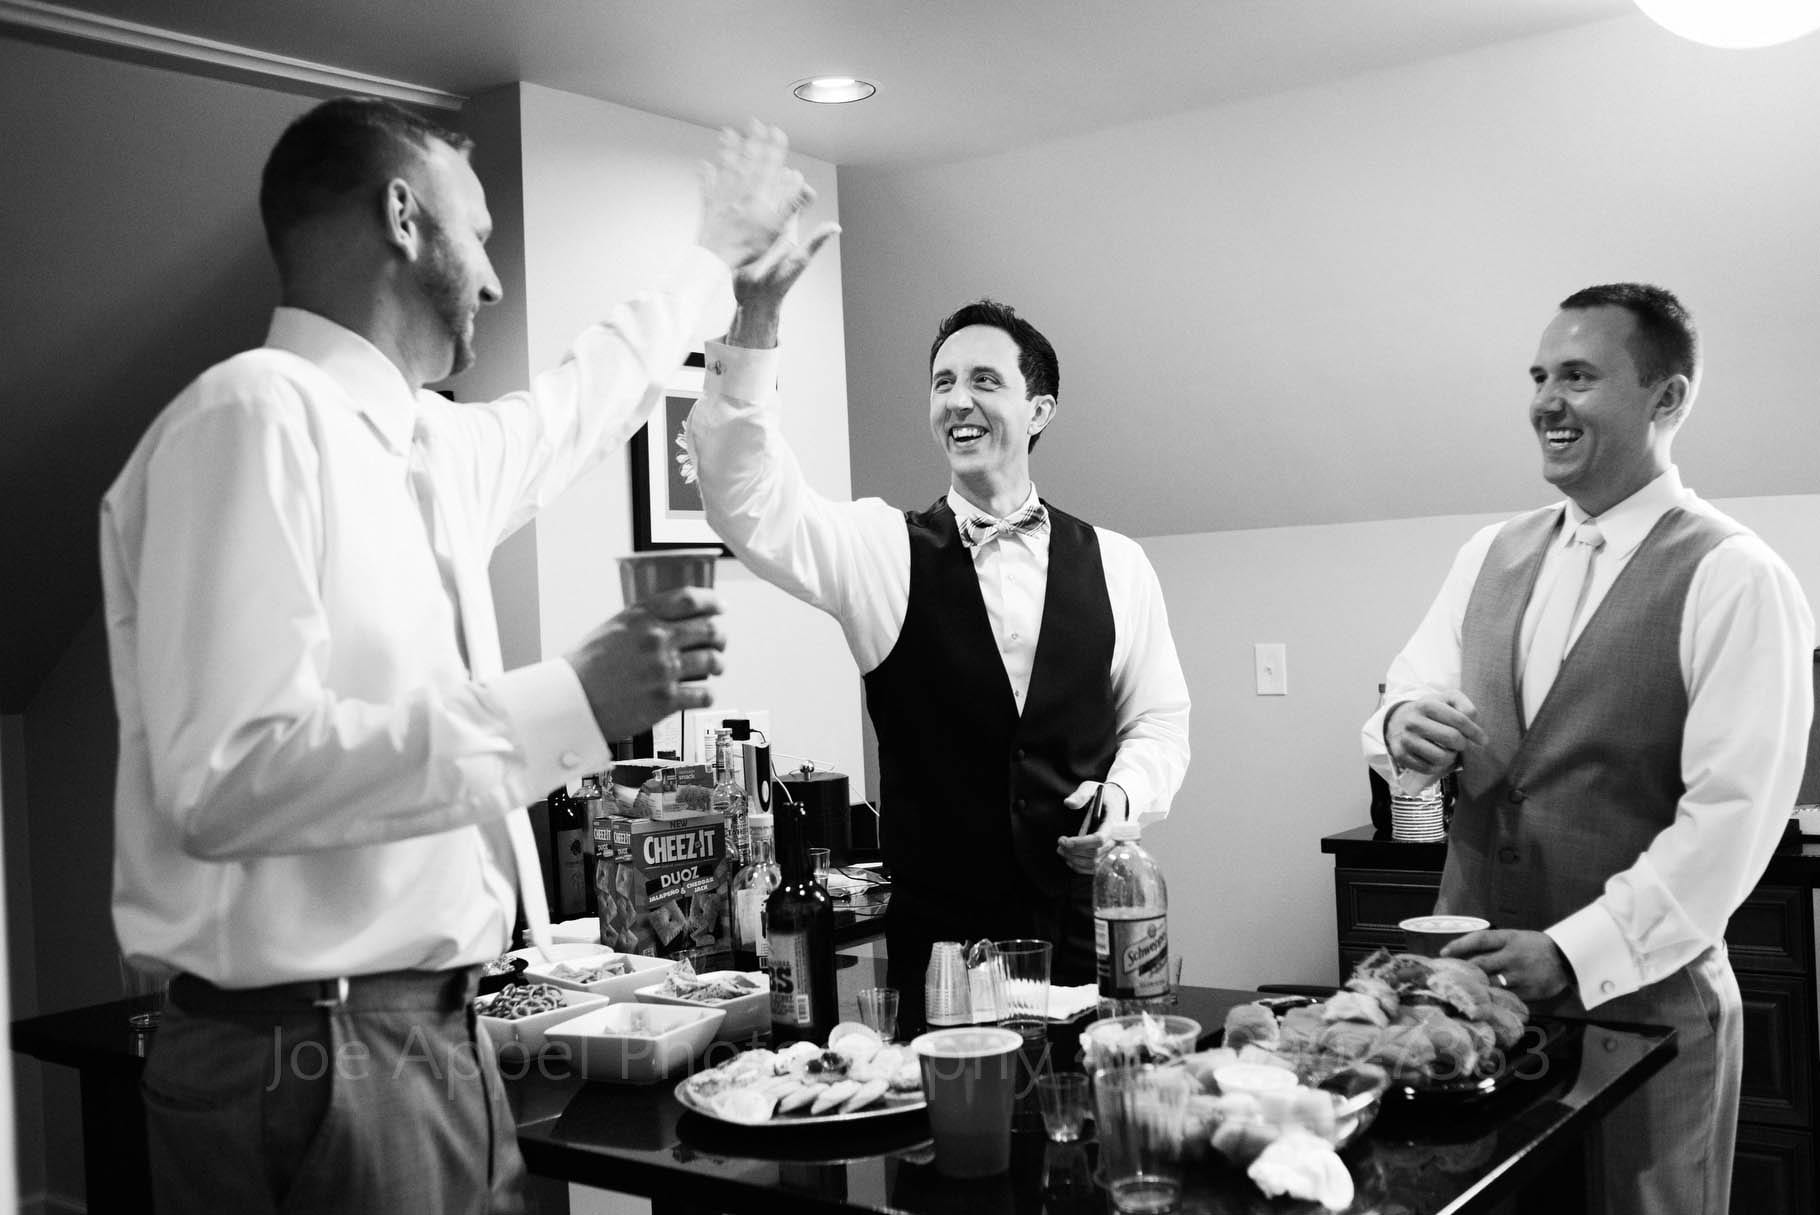 Three men have drinks around a table with booze and snacks on it. Two of the men are exchanging a high five while the third one laughs.